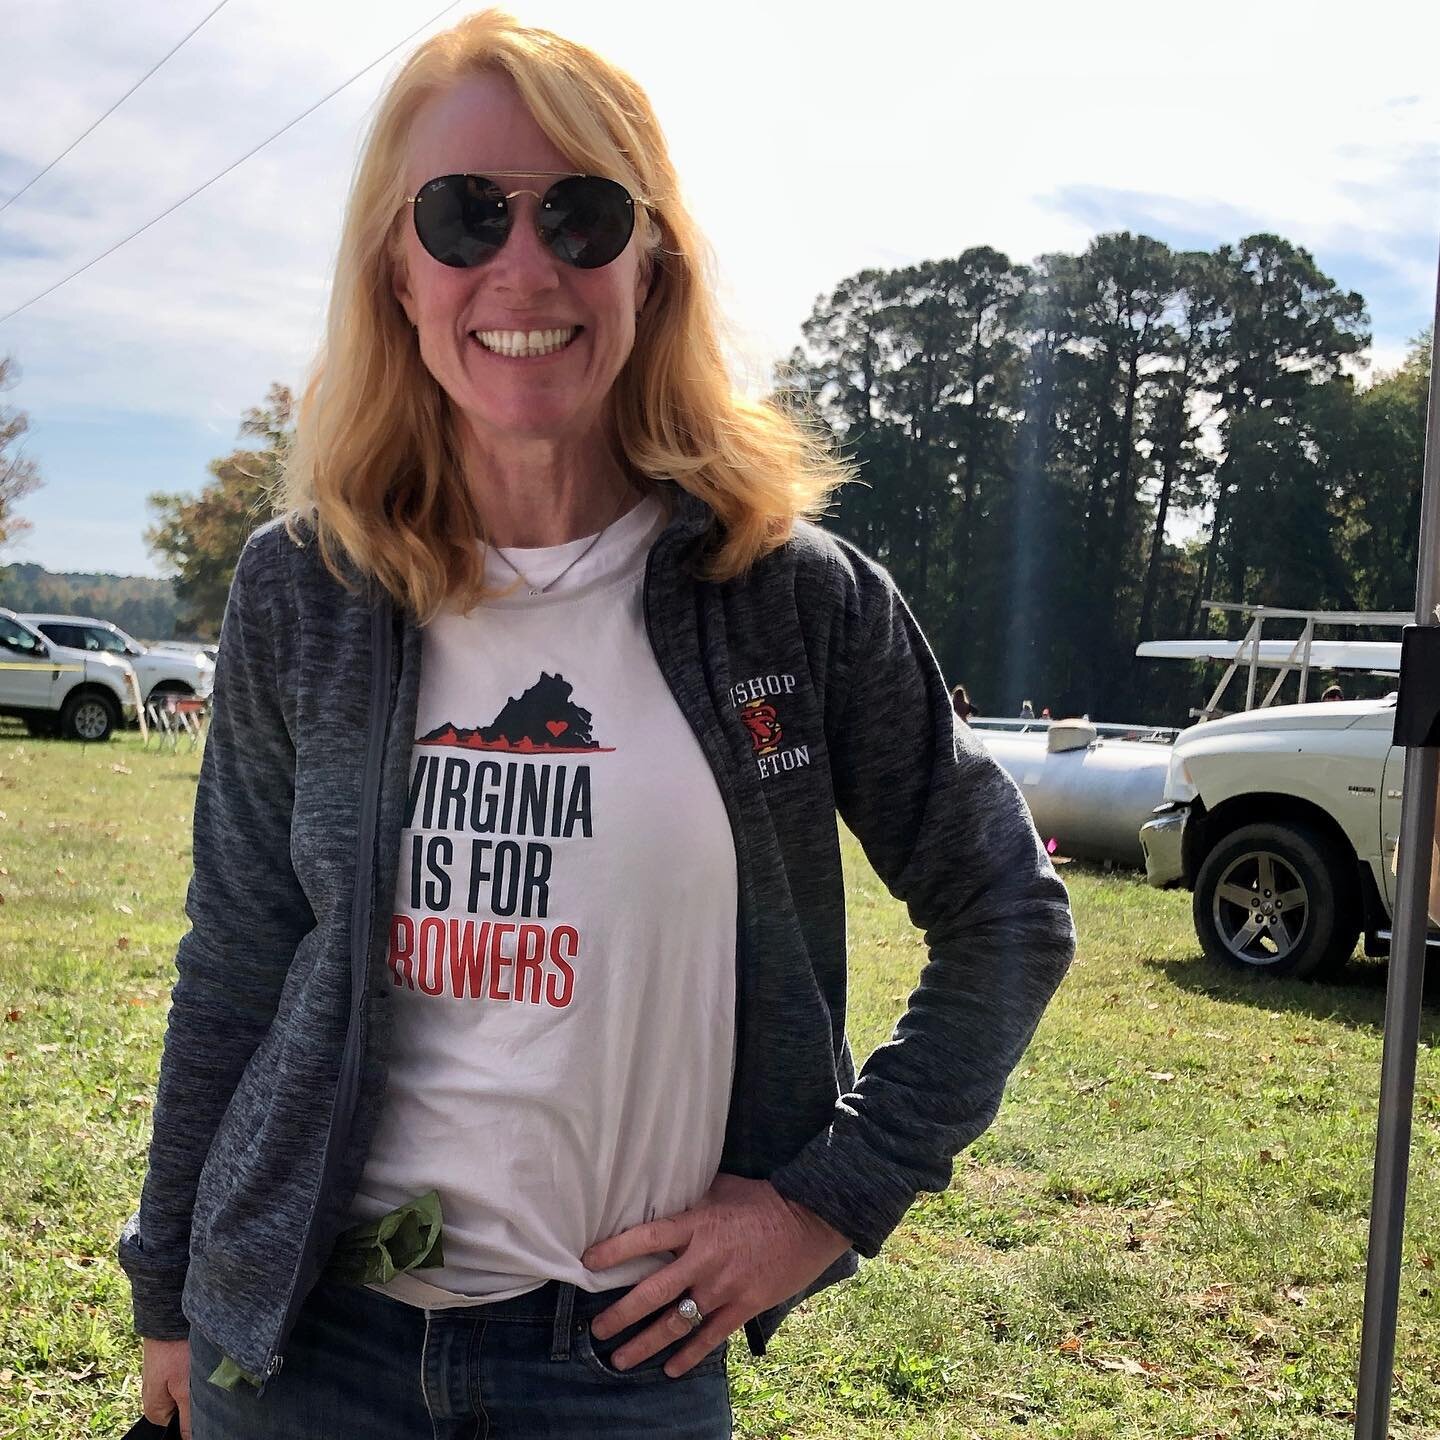 On site at @wbccrewjuniors Head of the Chickahominy today. Love seeing folks repping RowSource at the regatta! Stop by our vendor tent by the food truck to say hi, buy some swag, and talk shop! Or visit RowSource.com/shop